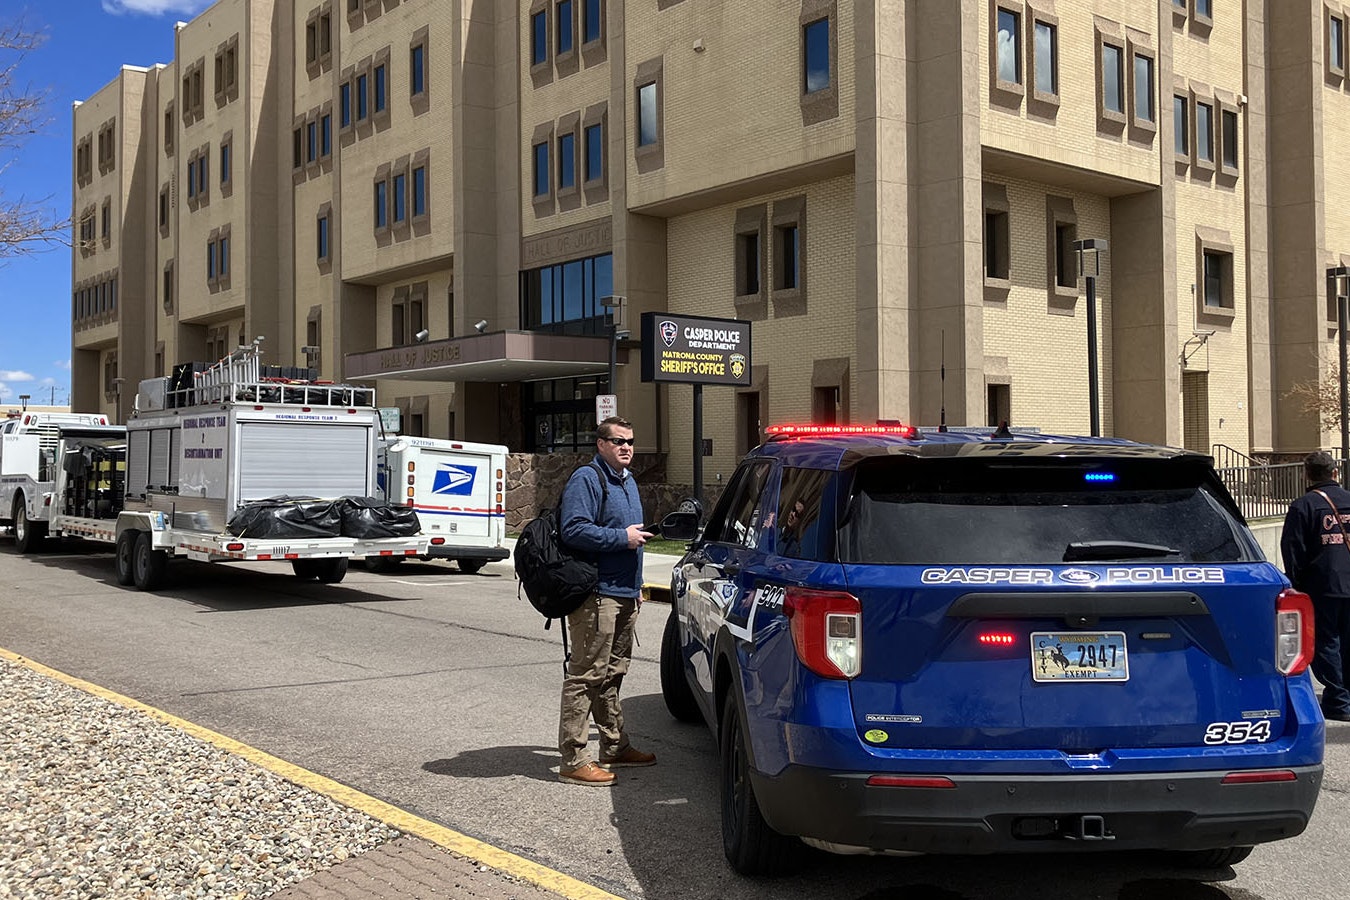 The Hall of Justice in Casper was evacuated and a special response team for hazardous substances called in after a suspicious package was delivered Thursday.